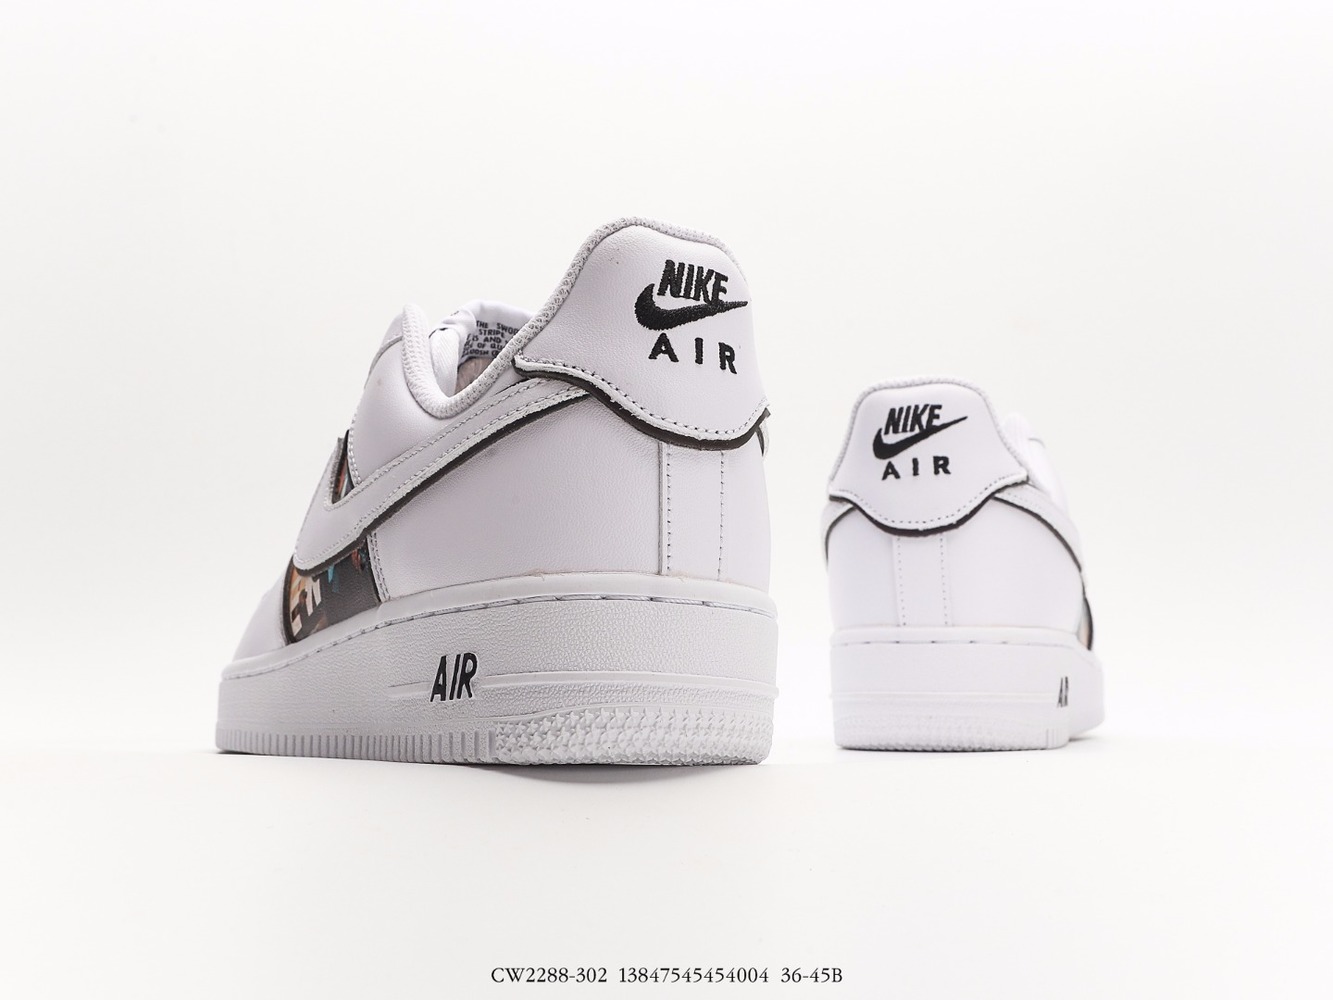 Grand Theft Auto x Nike Air Force 1 07 LV8